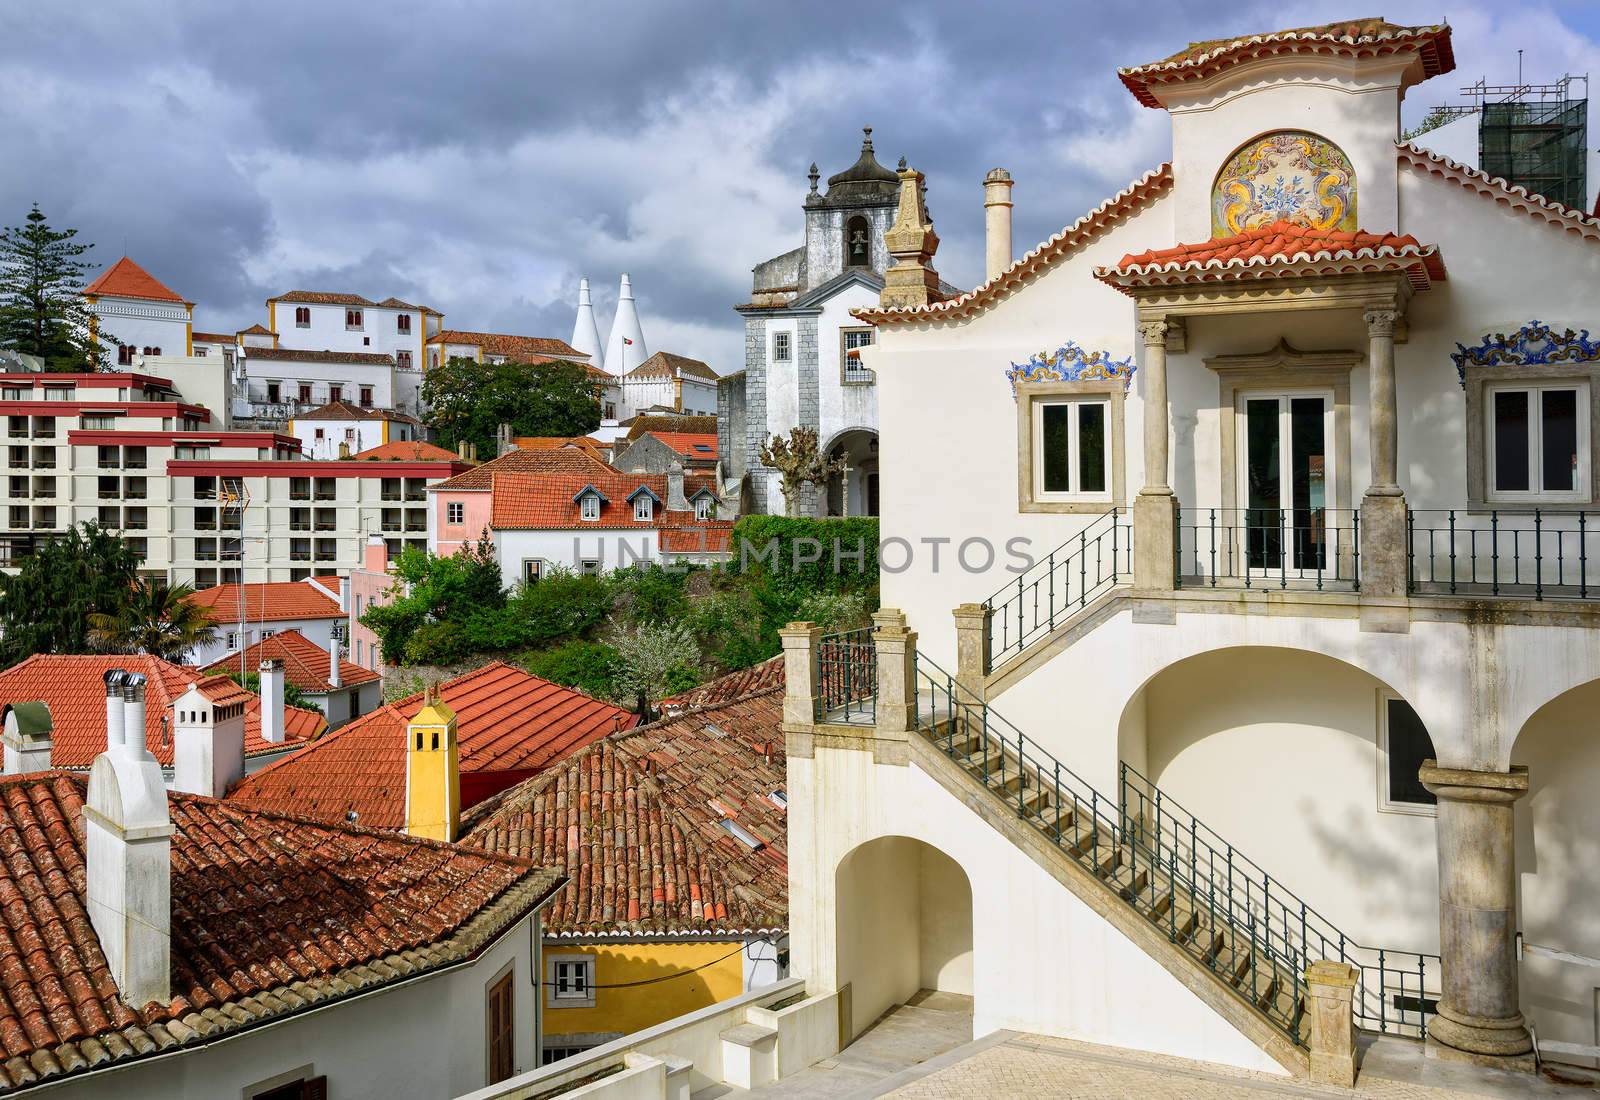 Sintra town, Portugal, the National Palace in background by GlobePhotos